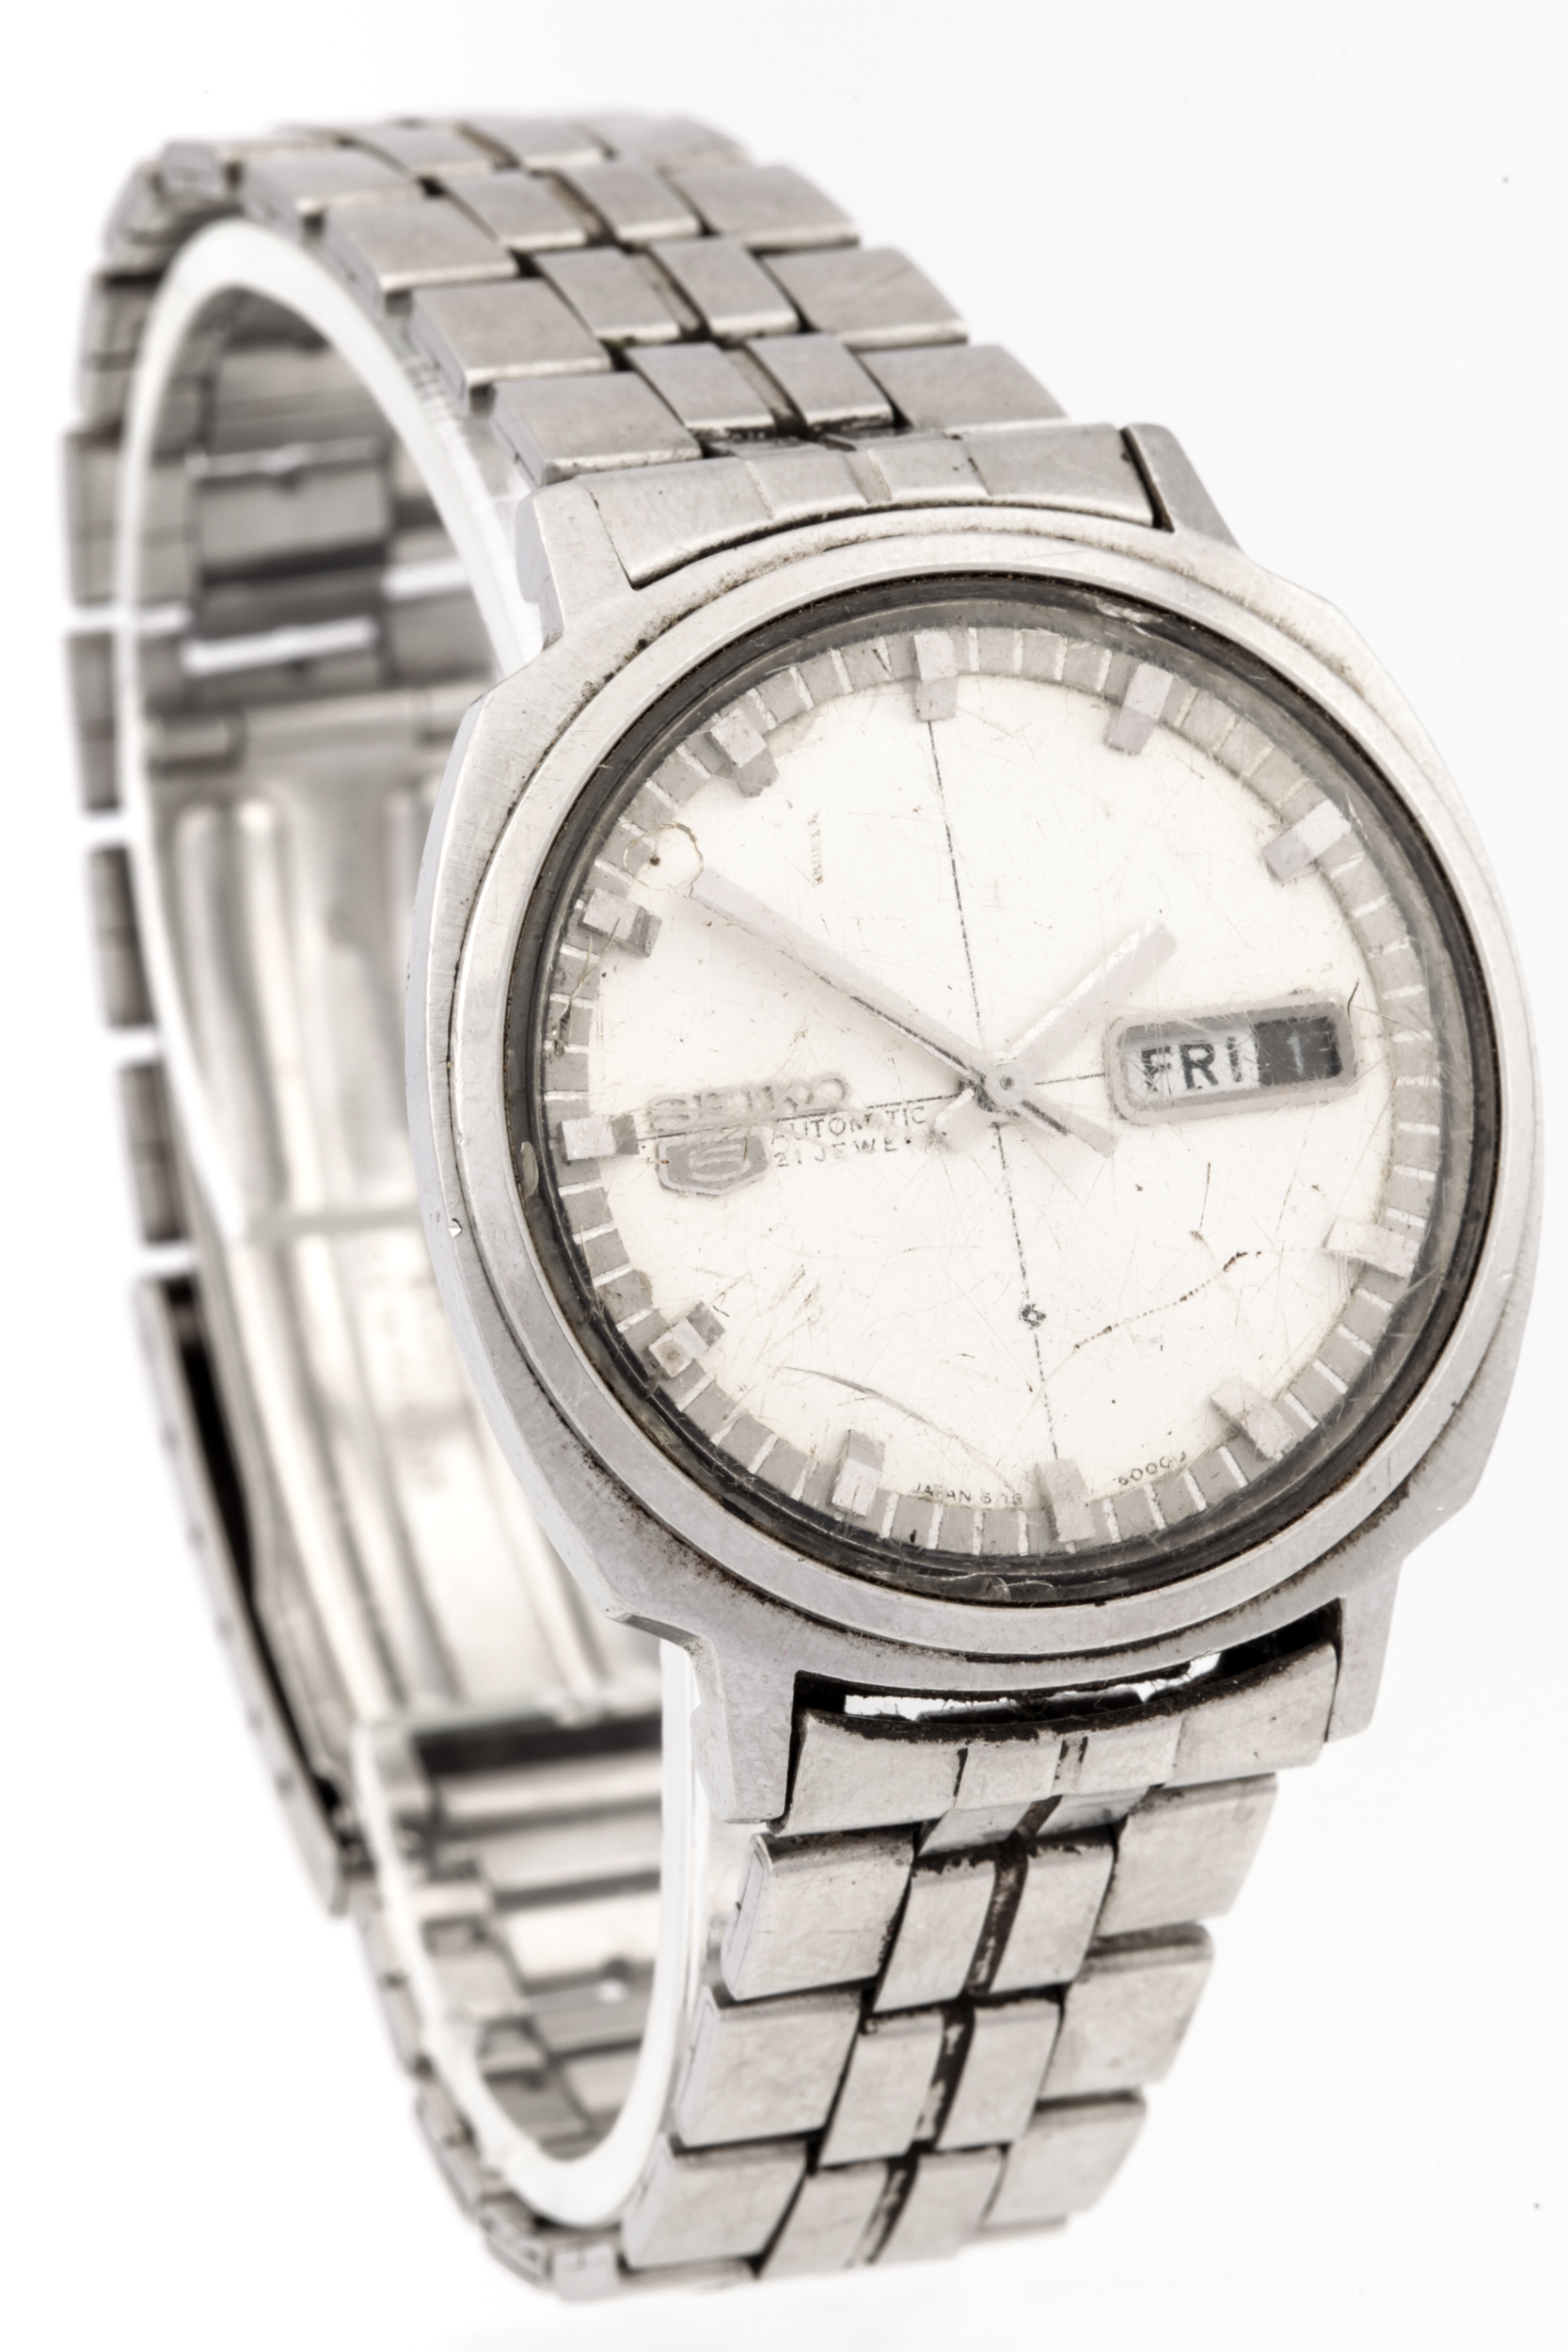 Seiko, 5, a gentleman's stainless steel automatic chronograph bracelet watch.